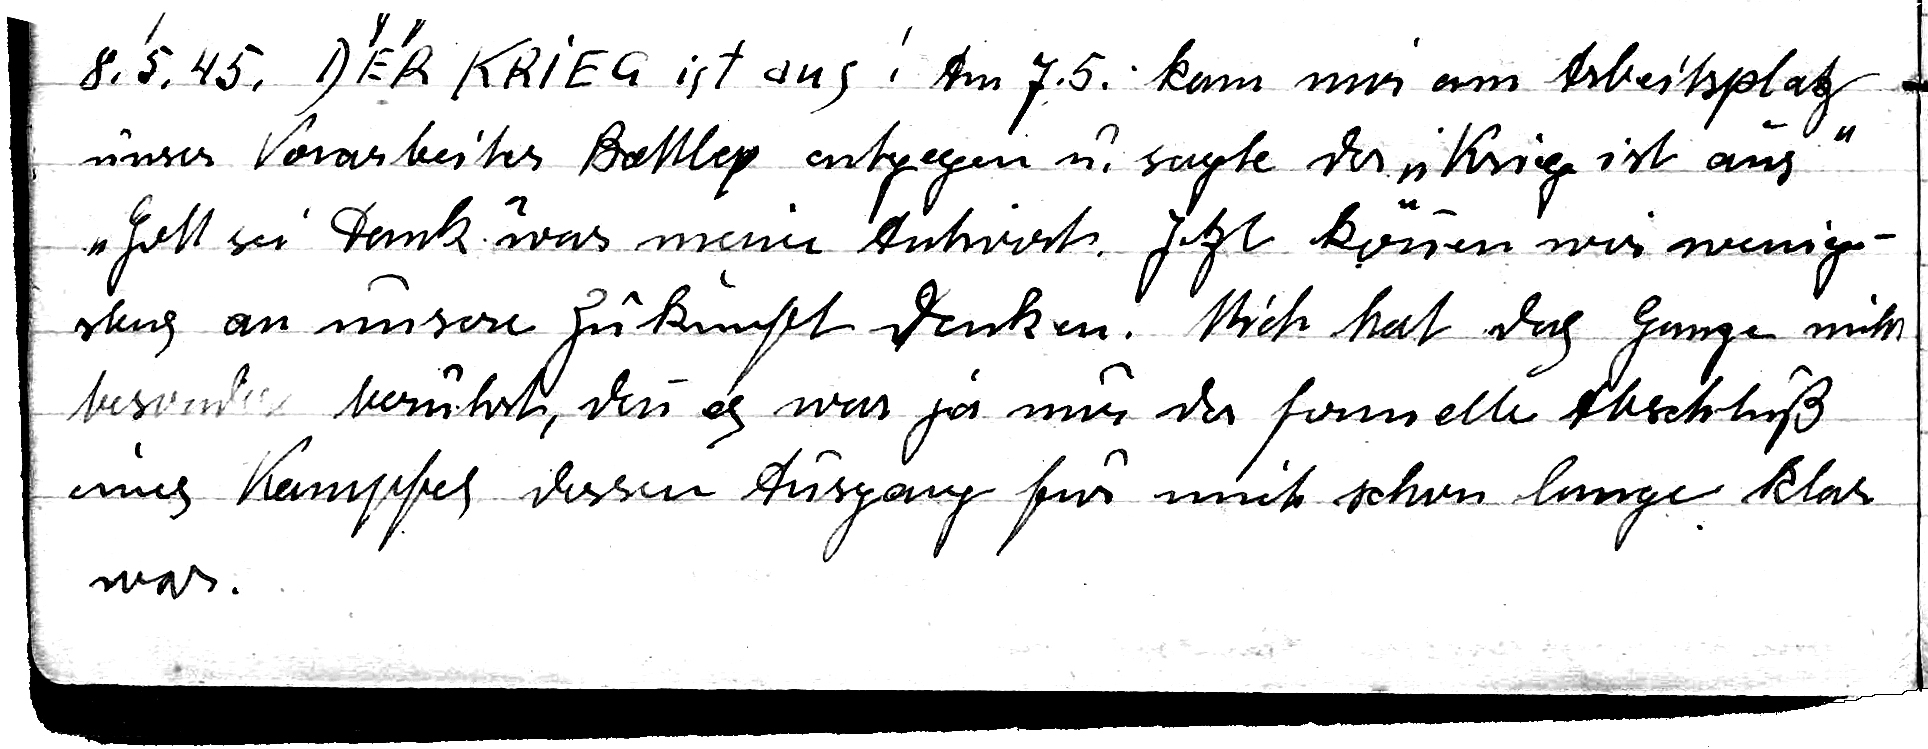 page 9 of the Diary 